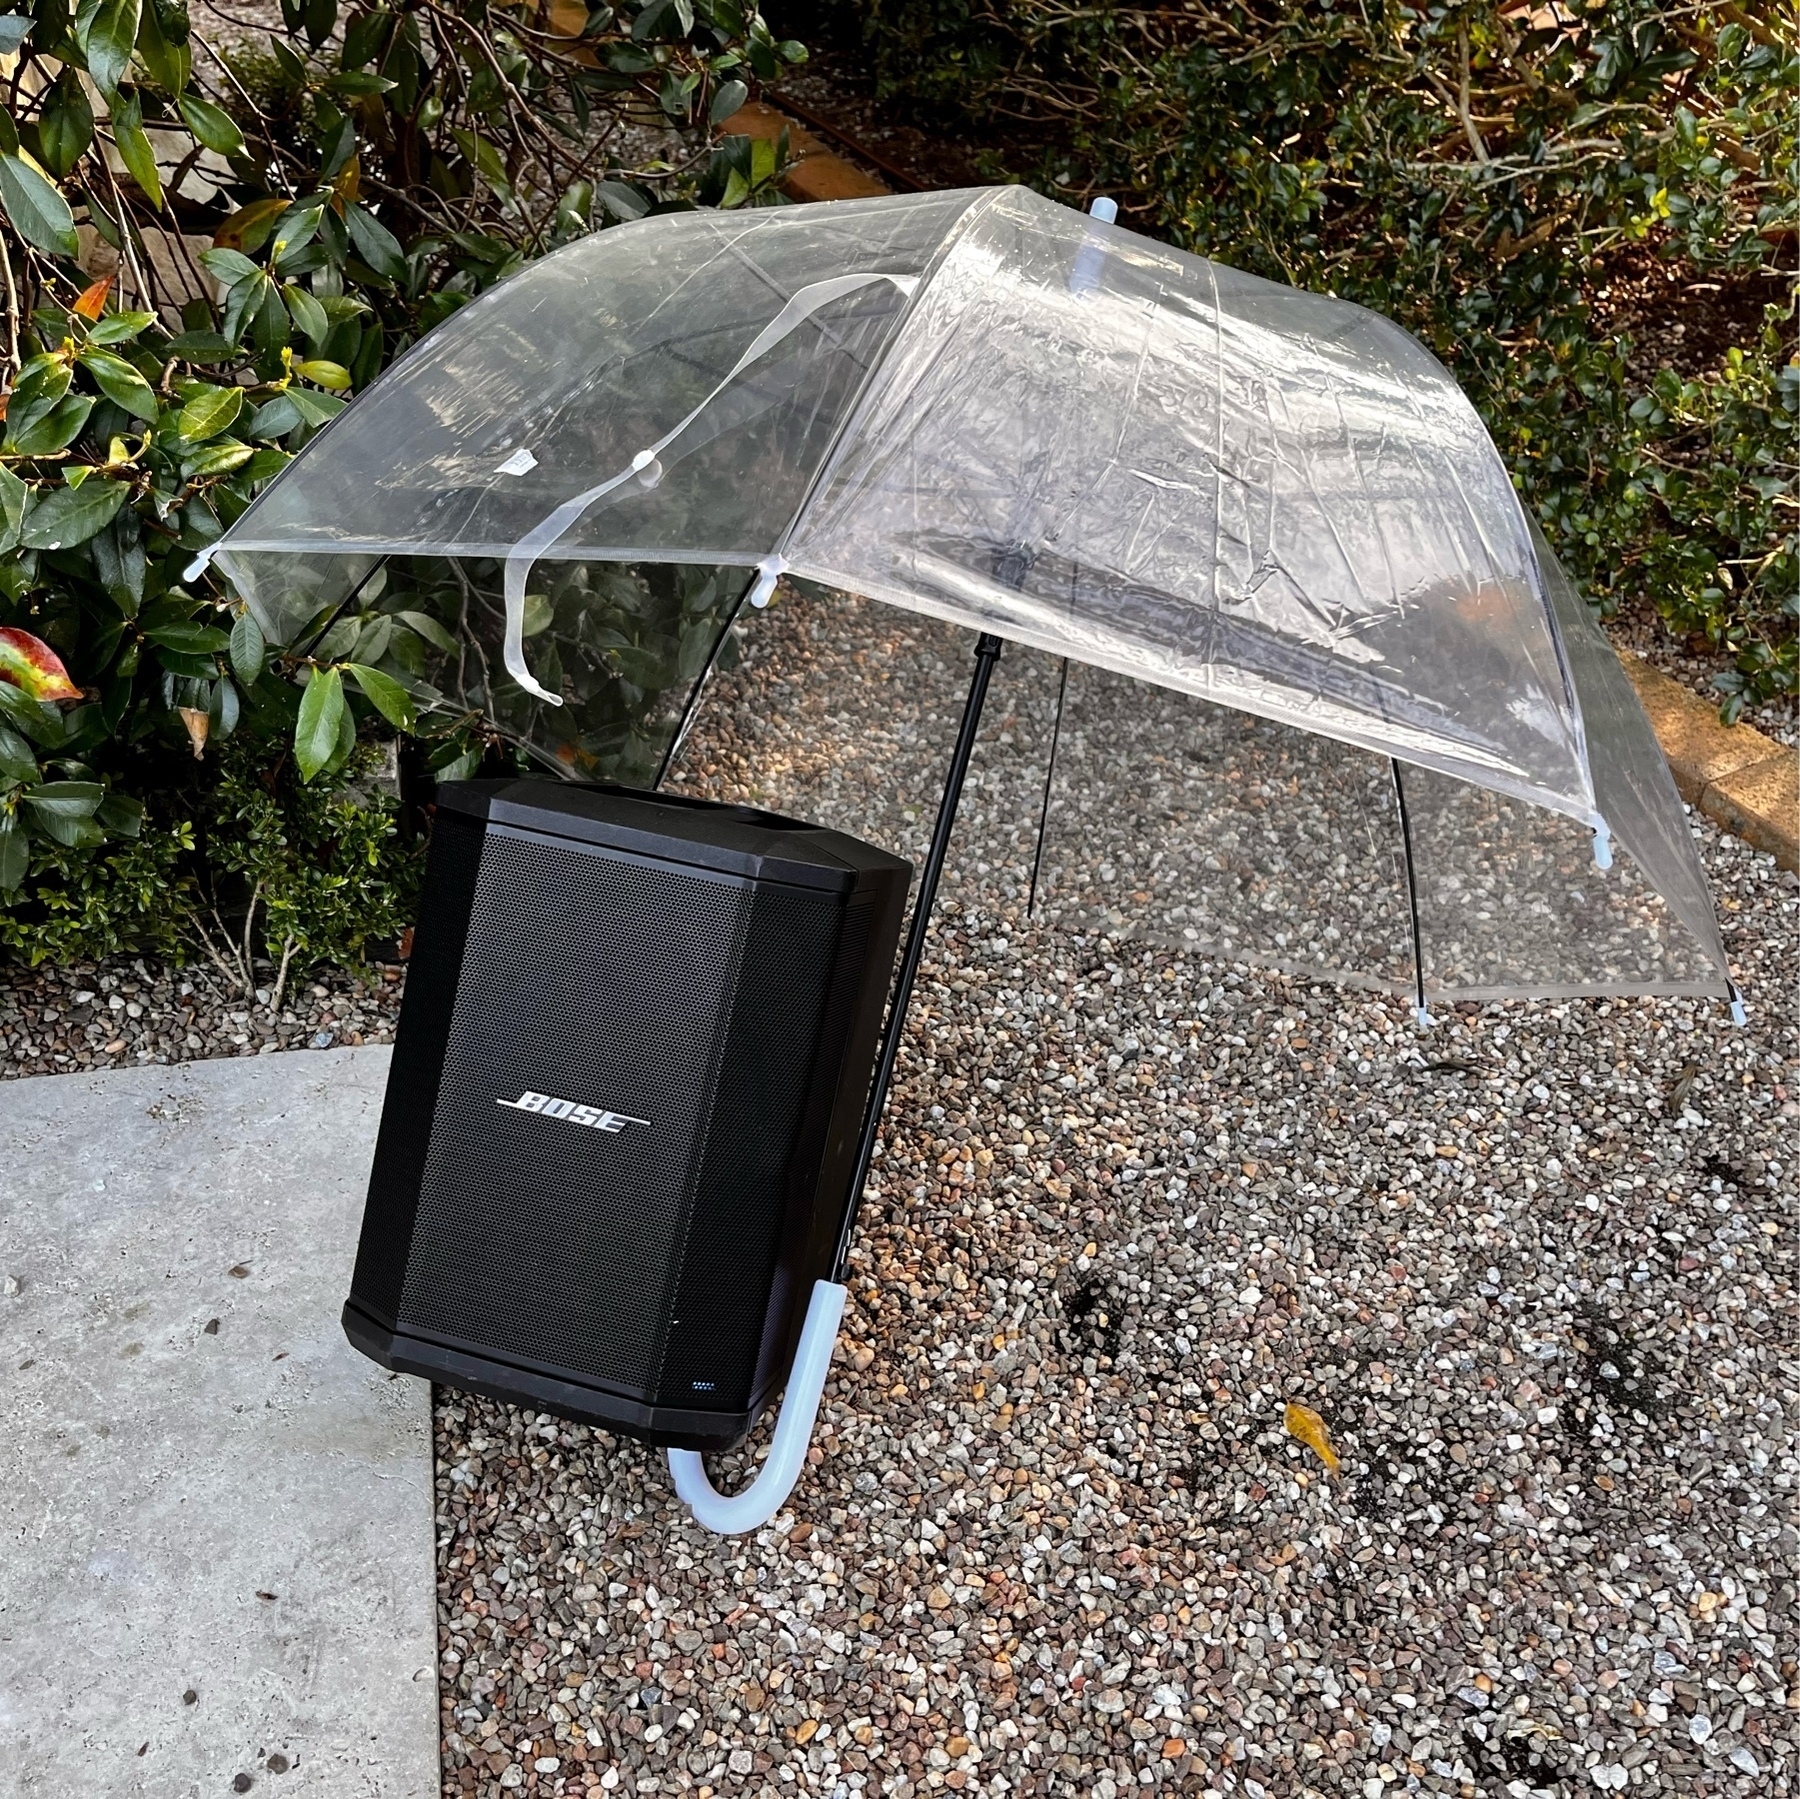 An umbrella propped up over a Bose speaker outside